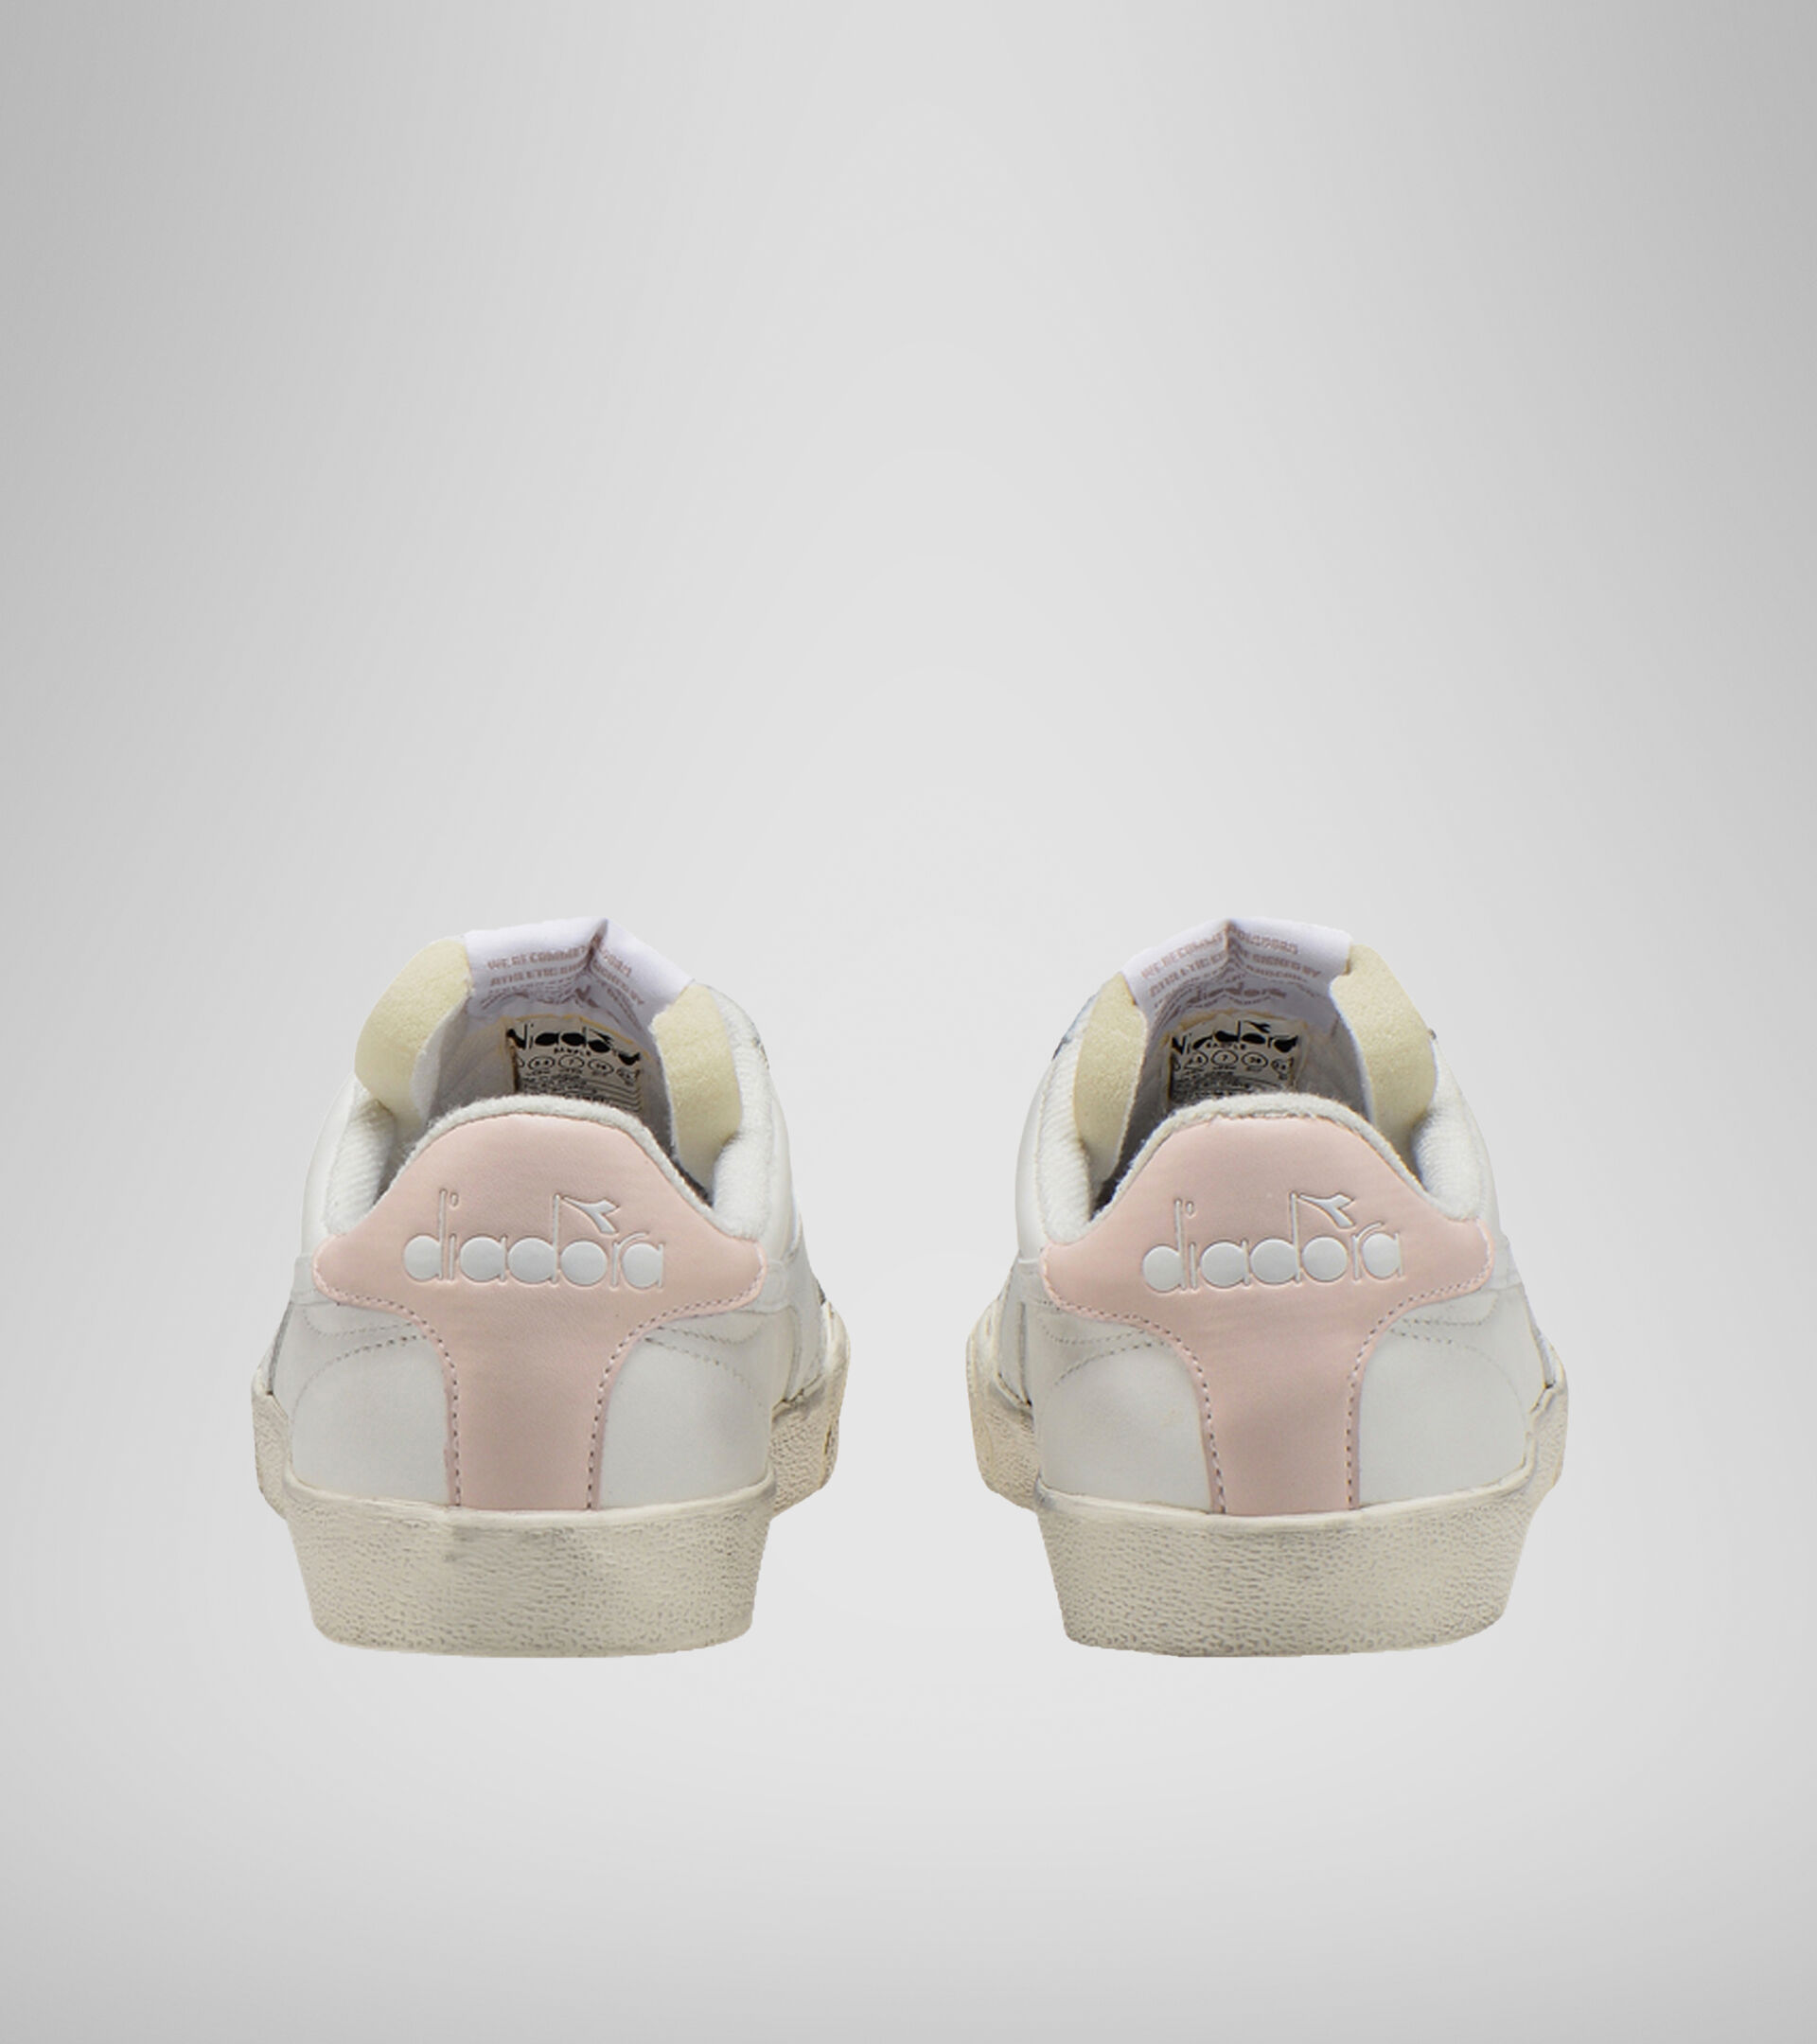 Chaussures de sport - Unisexe MELODY LEATHER DIRTY BIANCO/ROSA NUVOLA - Diadora